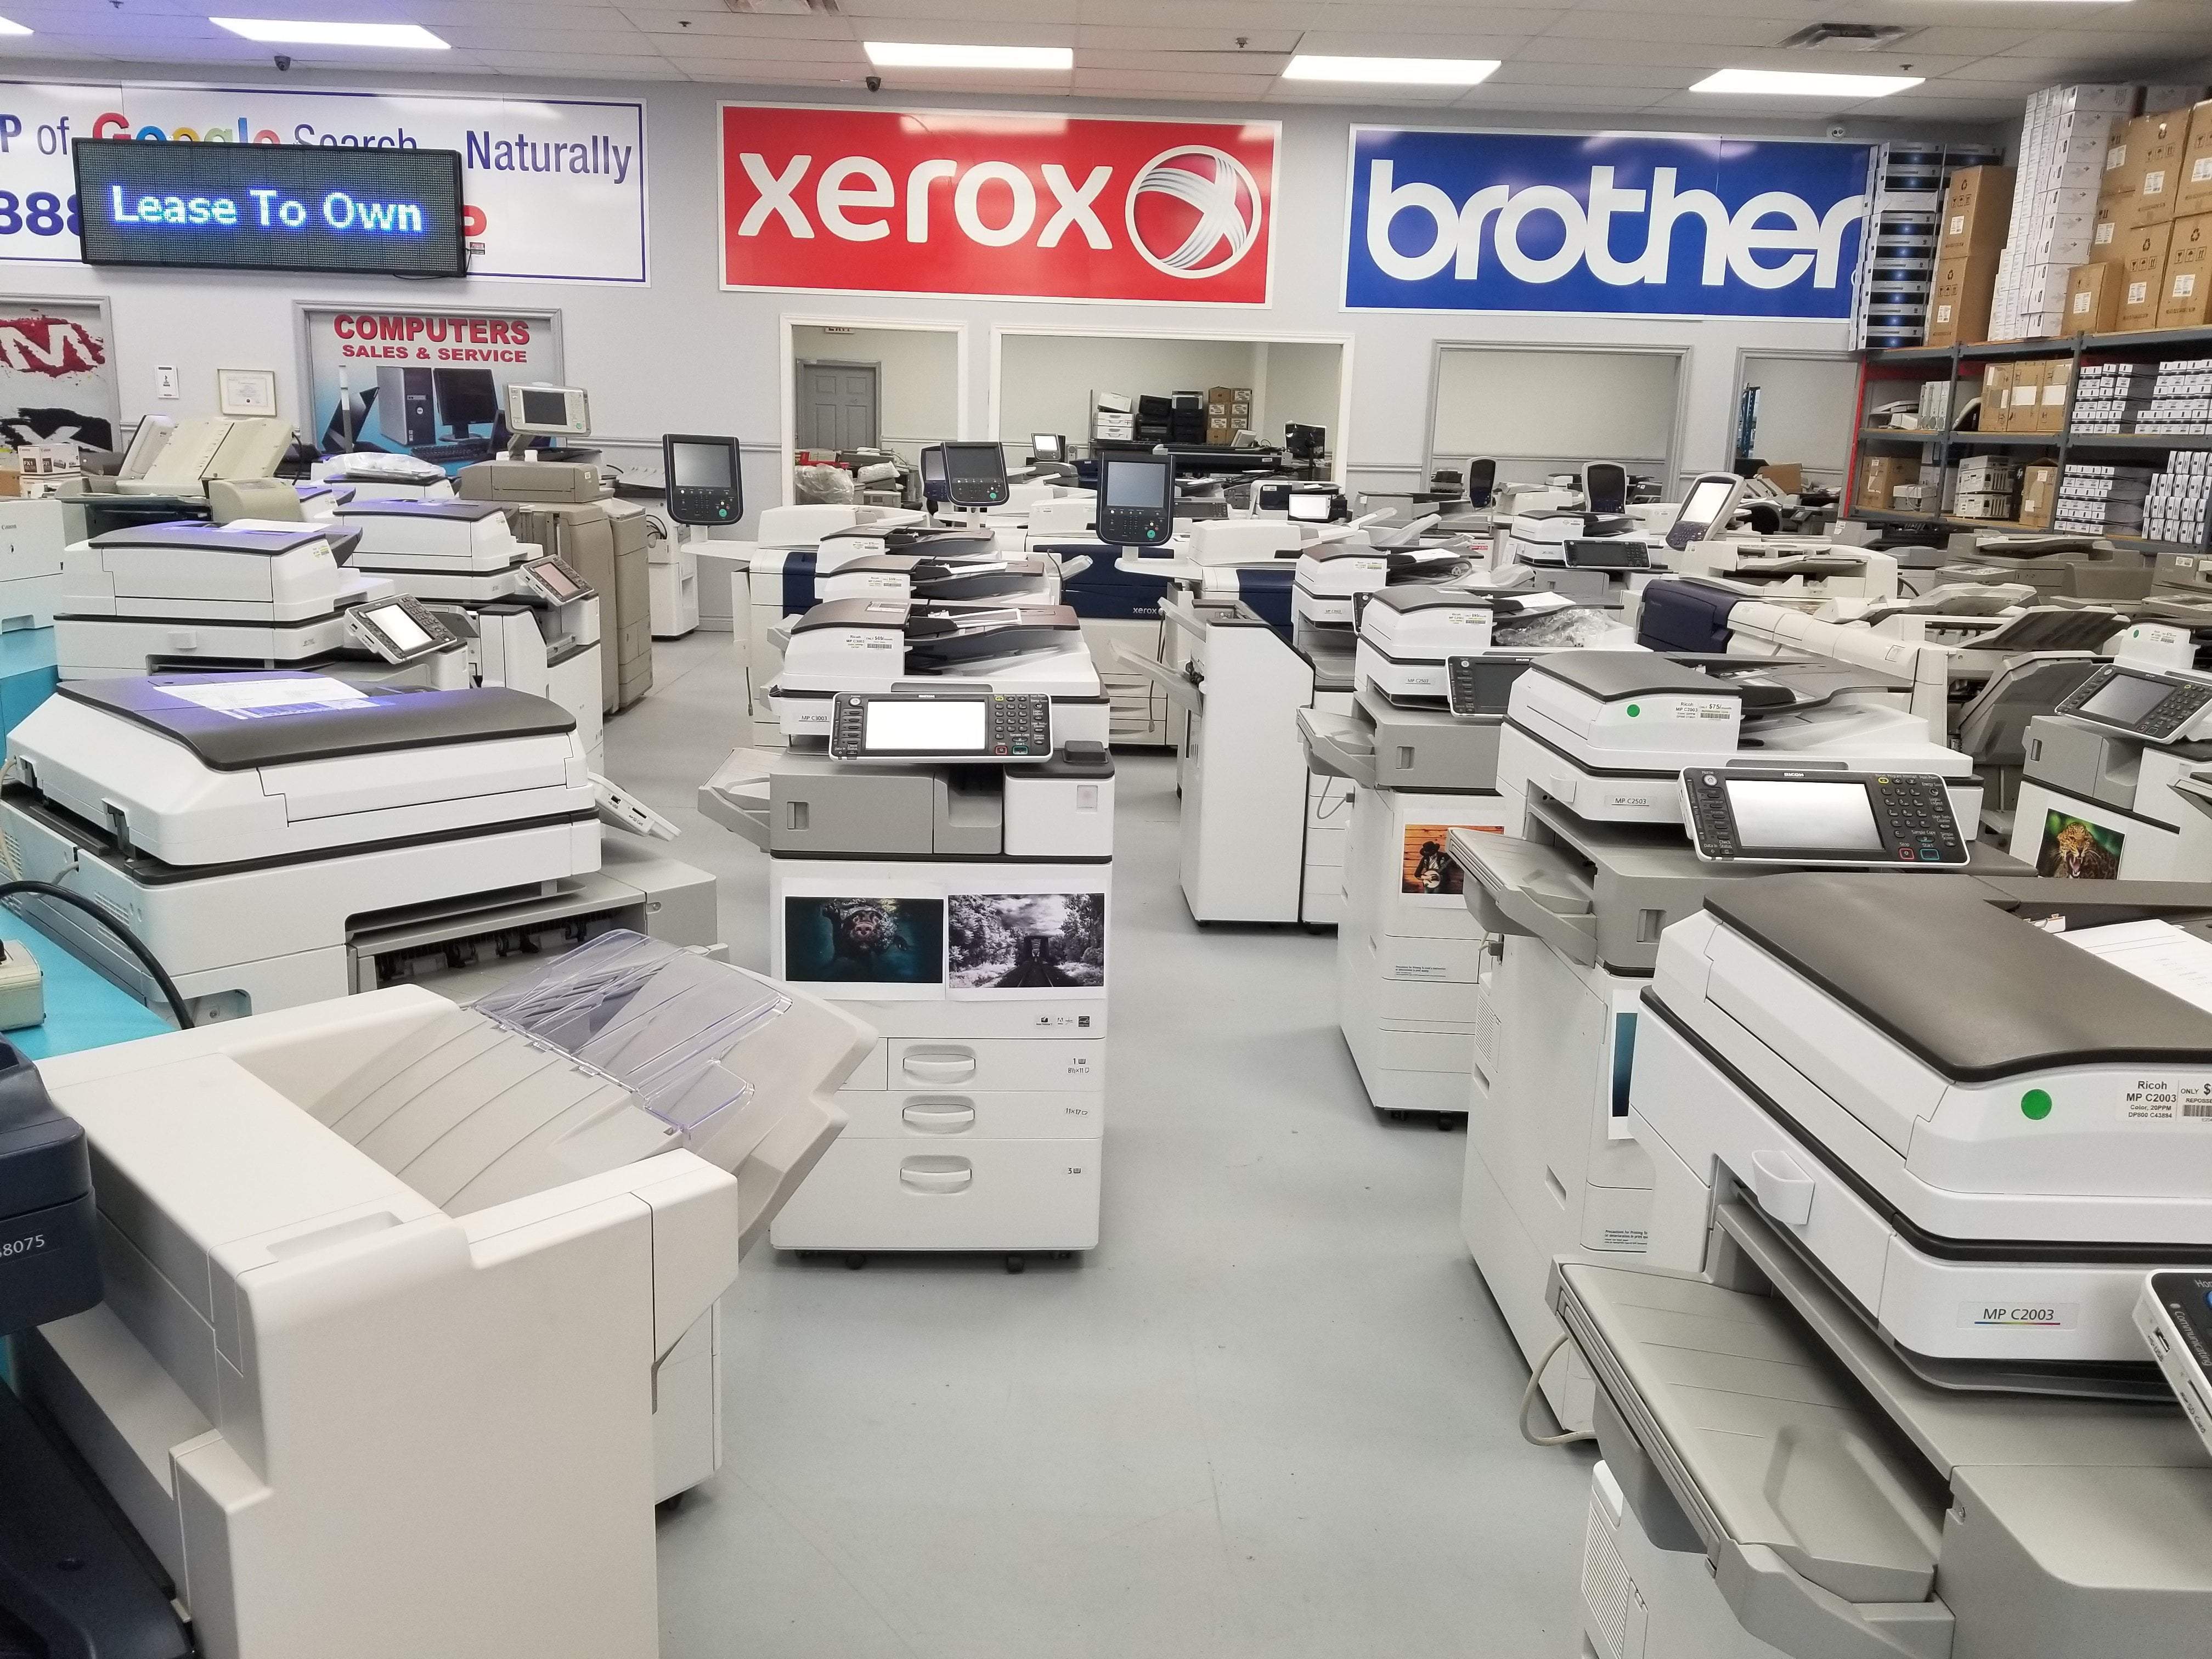 Why leasing Printers/Copiers is a good option?